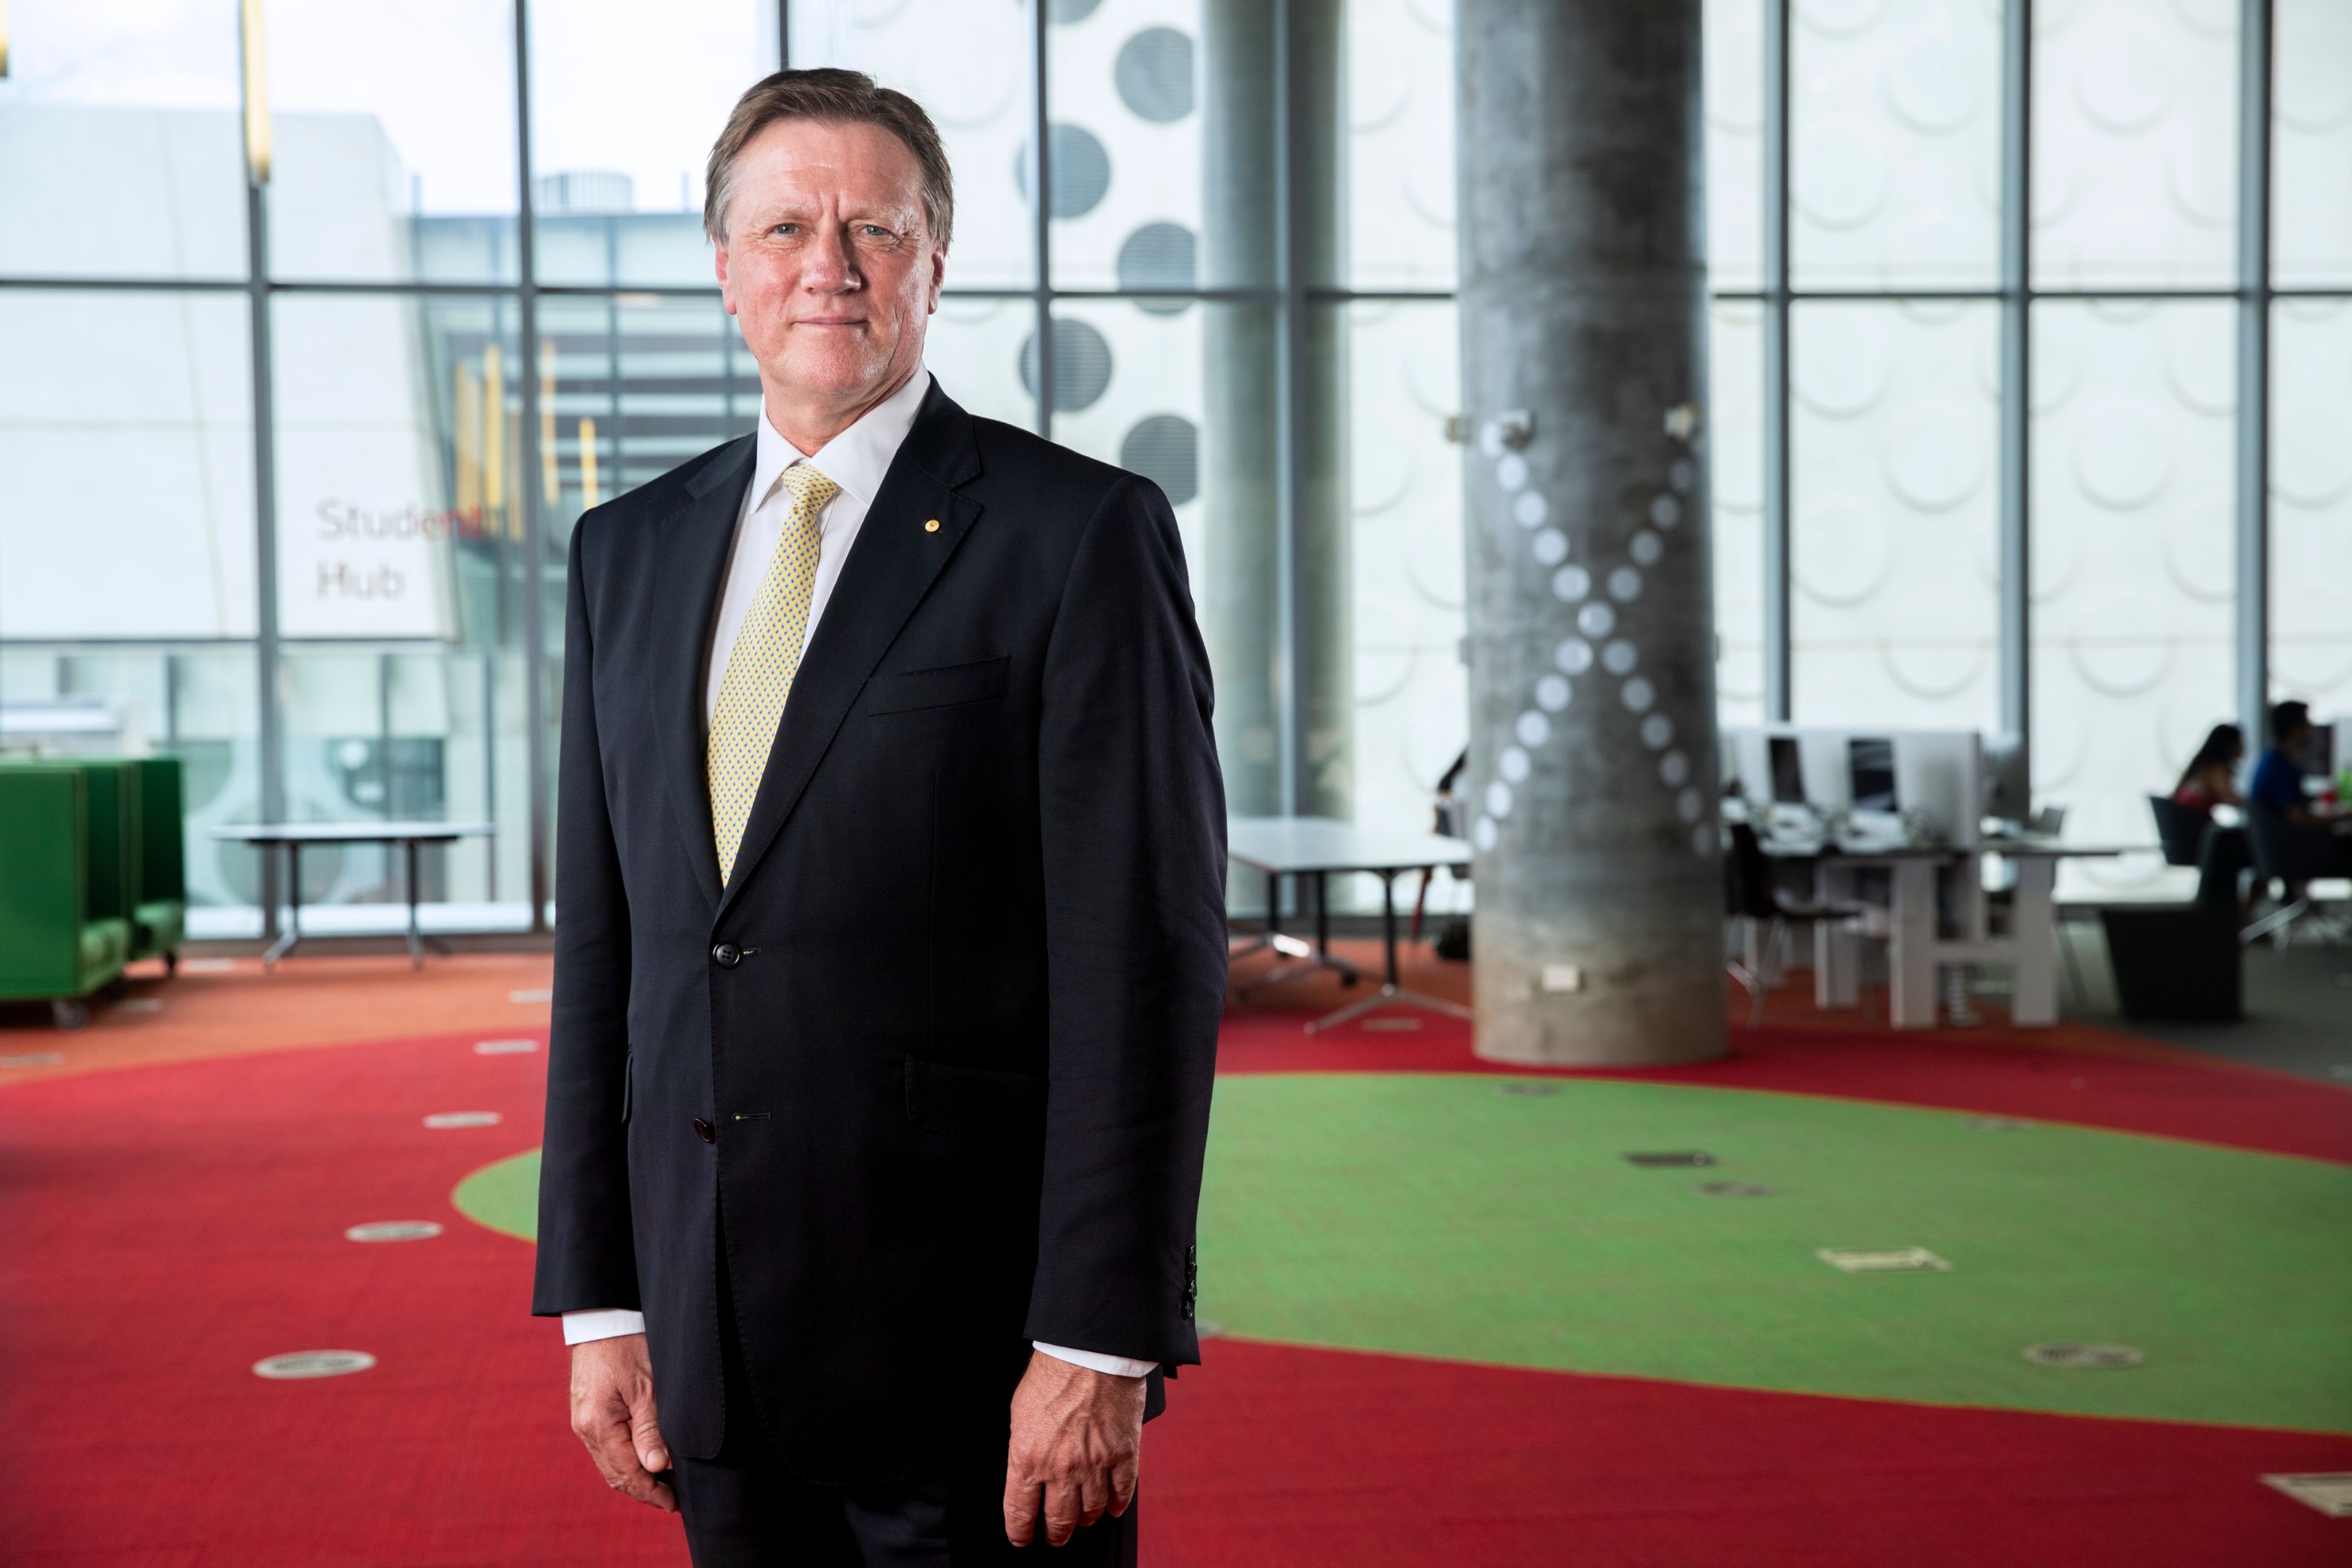 Chancellor of Swinburne stands wearing a suit looking to camera